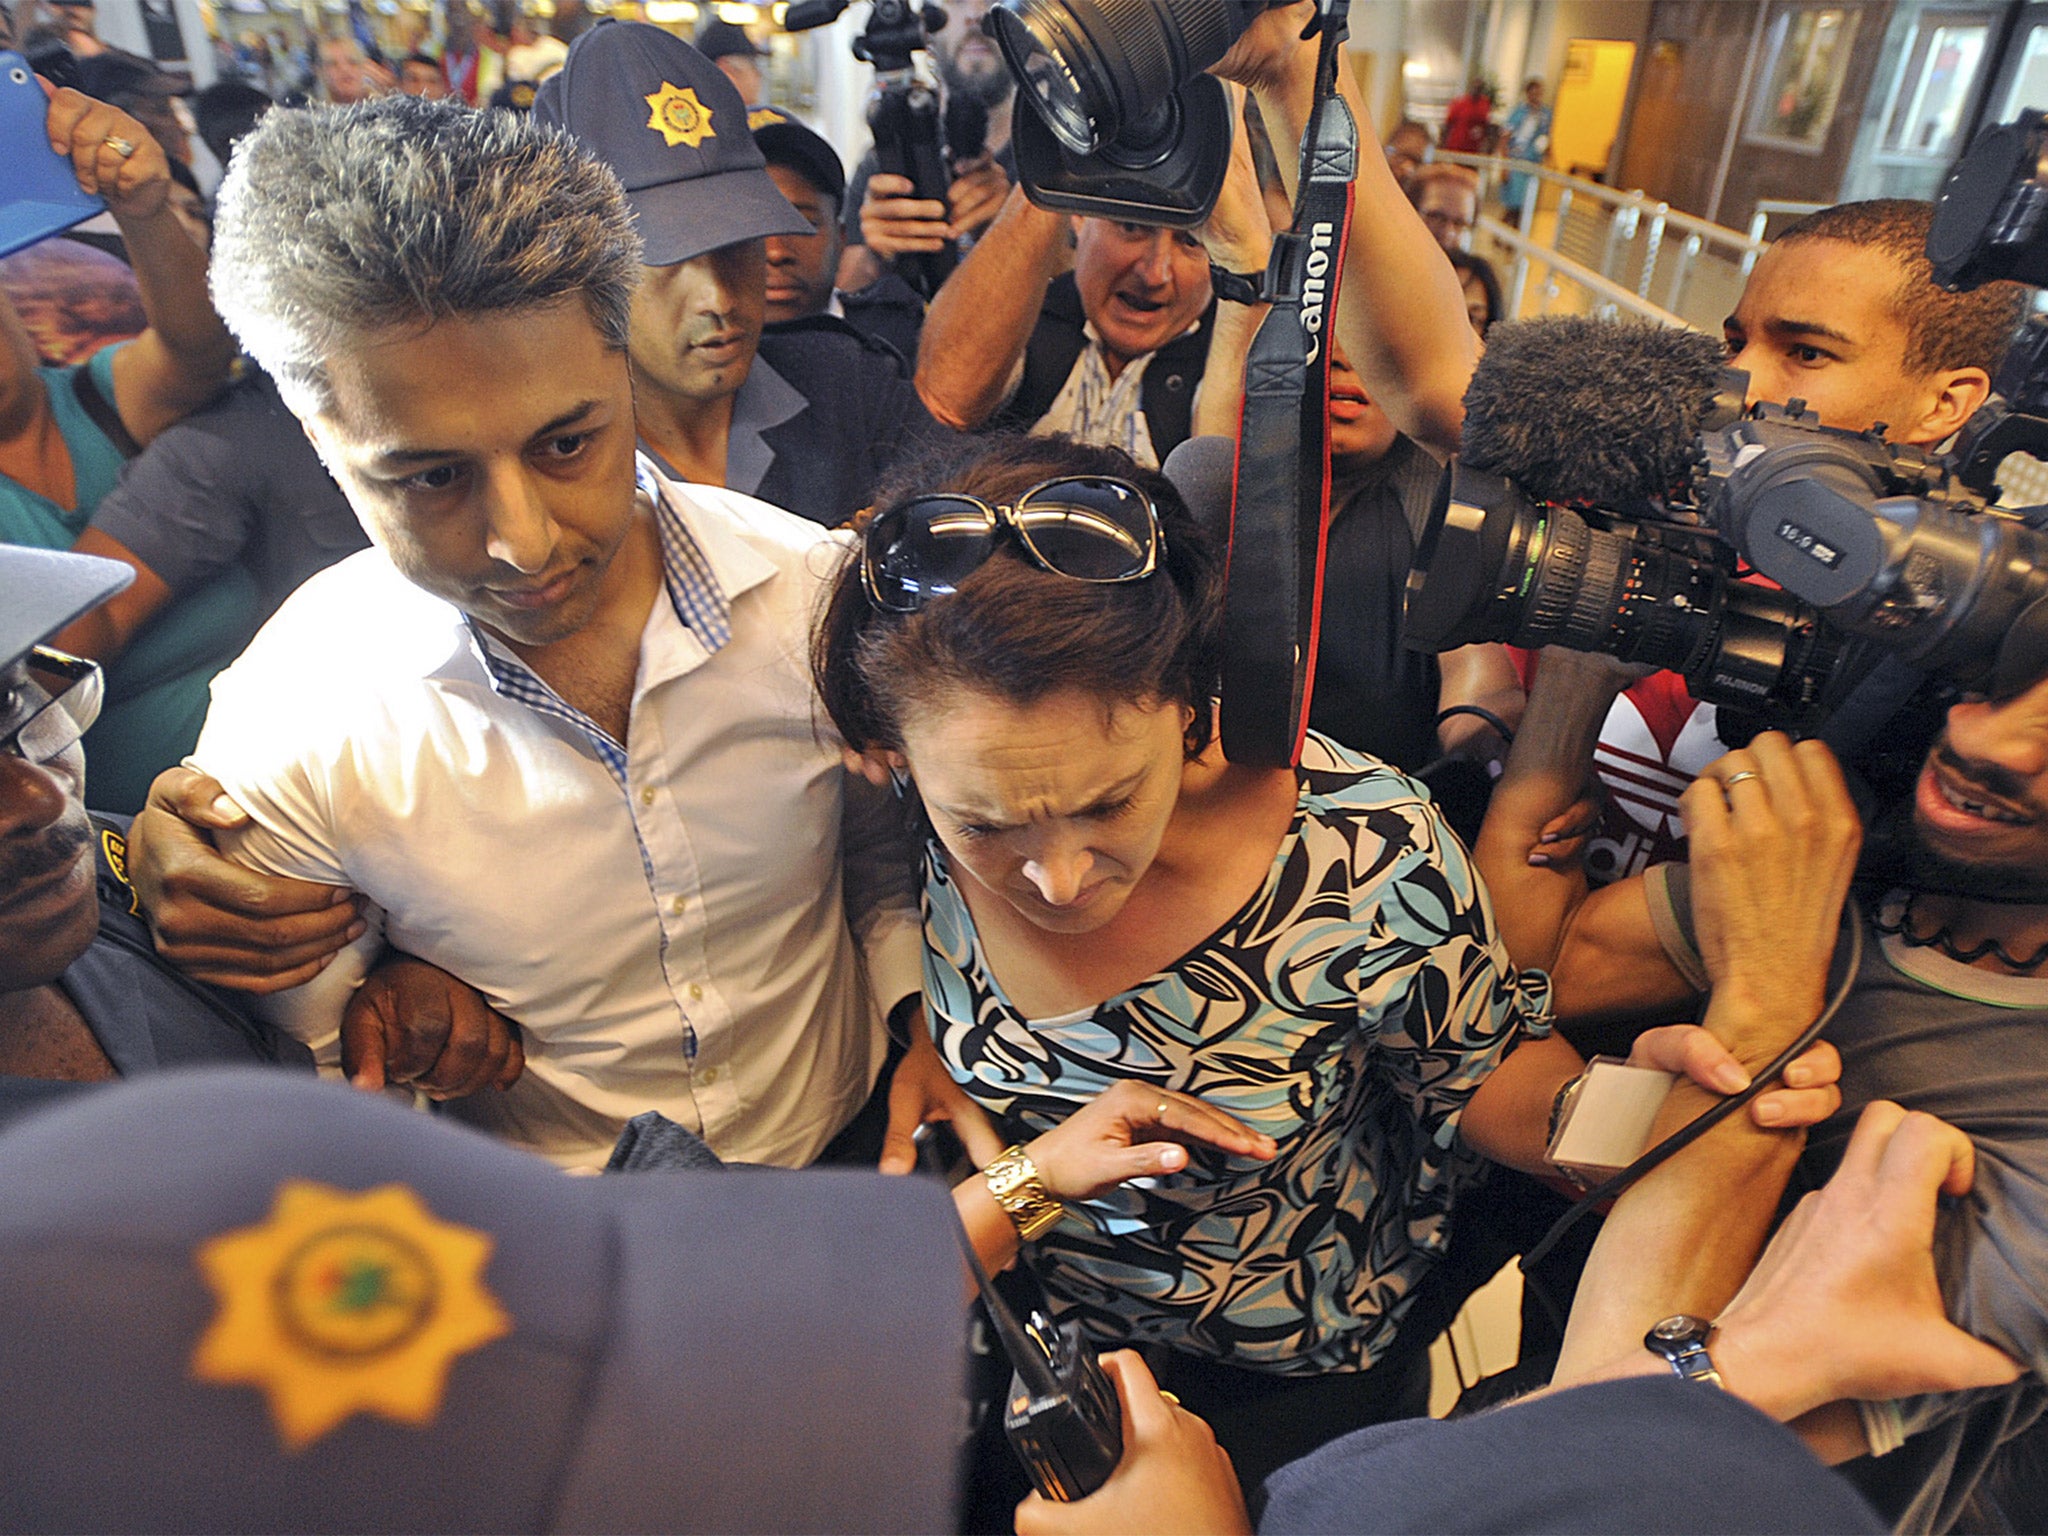 On Monday Dewani, left, had charges relating to the murder of his newly wedded wife, Anni Dewani, thrown out of court